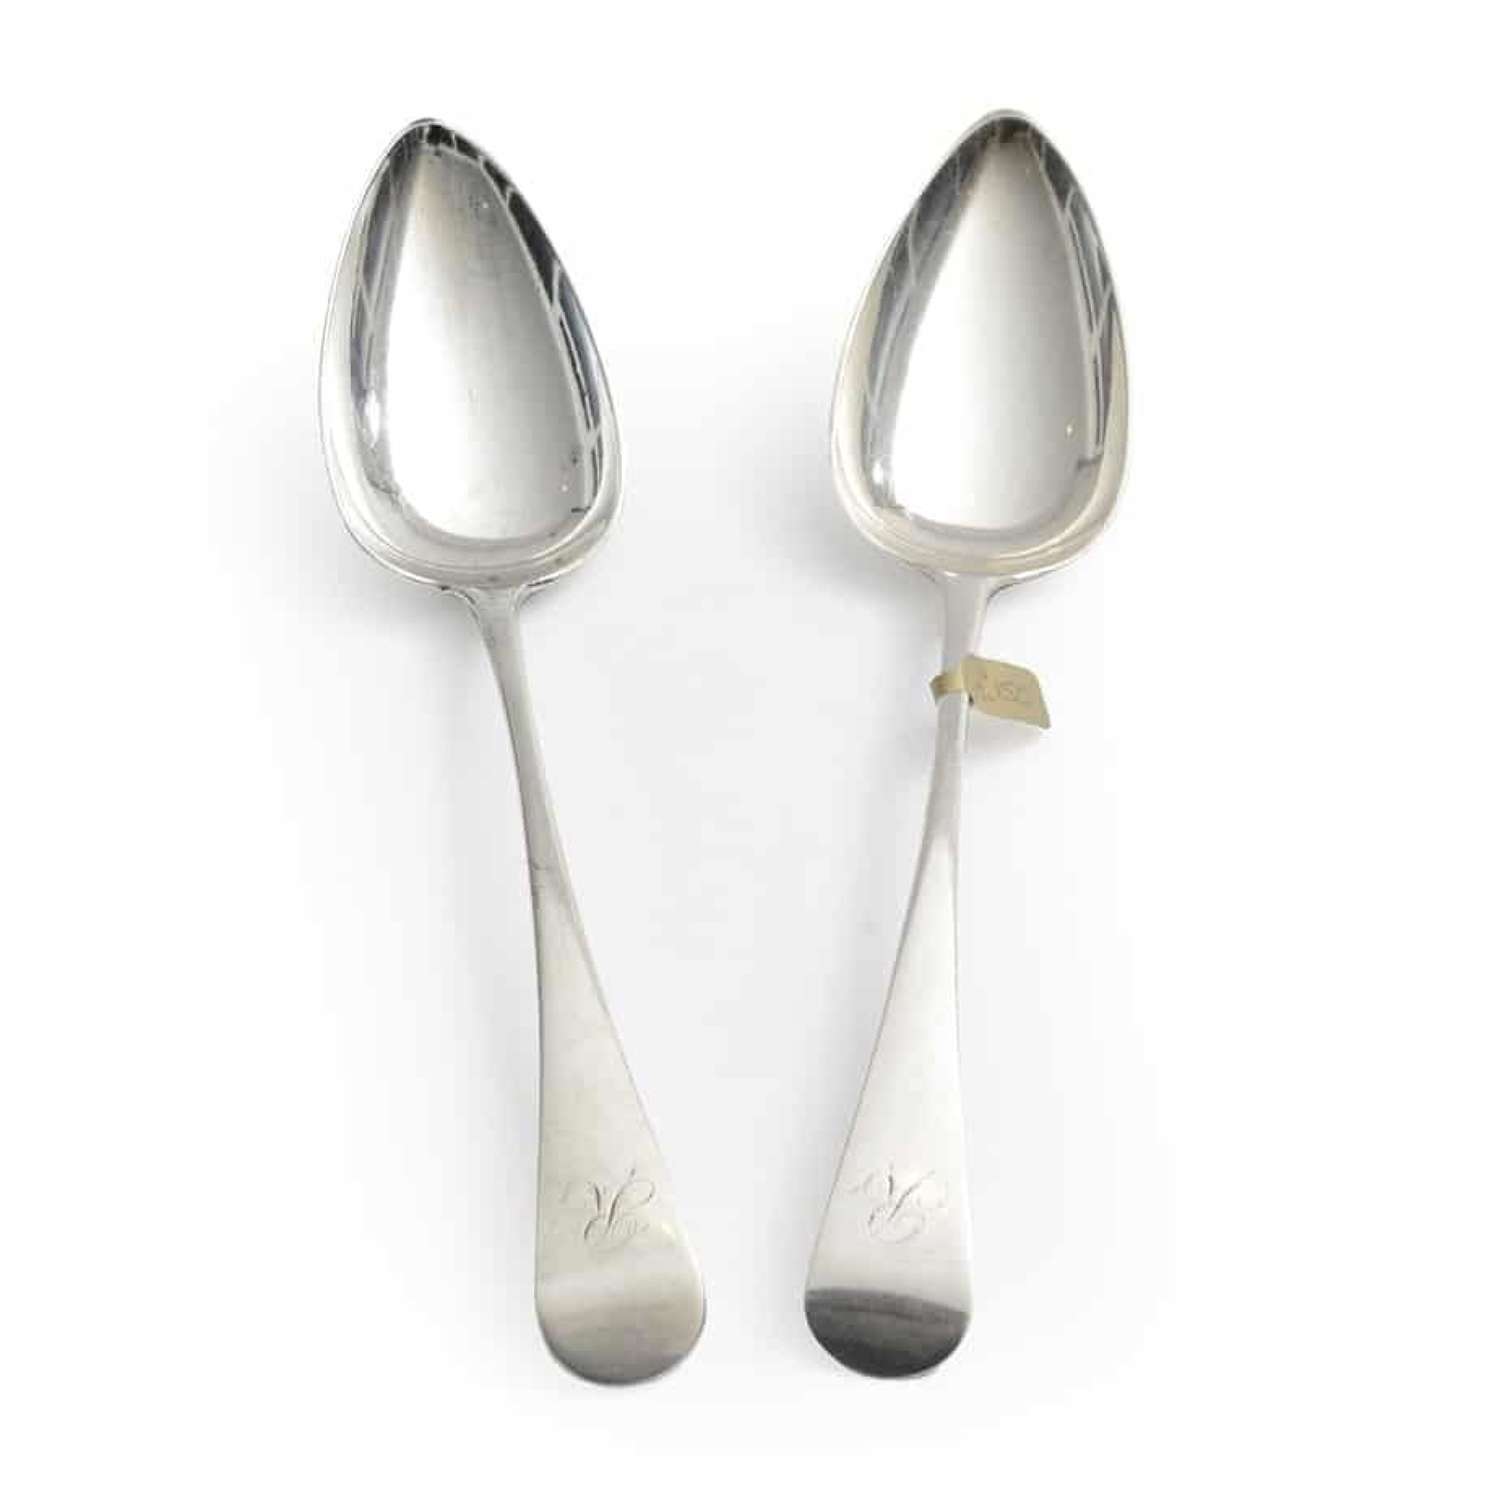 Pair of Old English silver soup spoons - by Alice and George Burrows